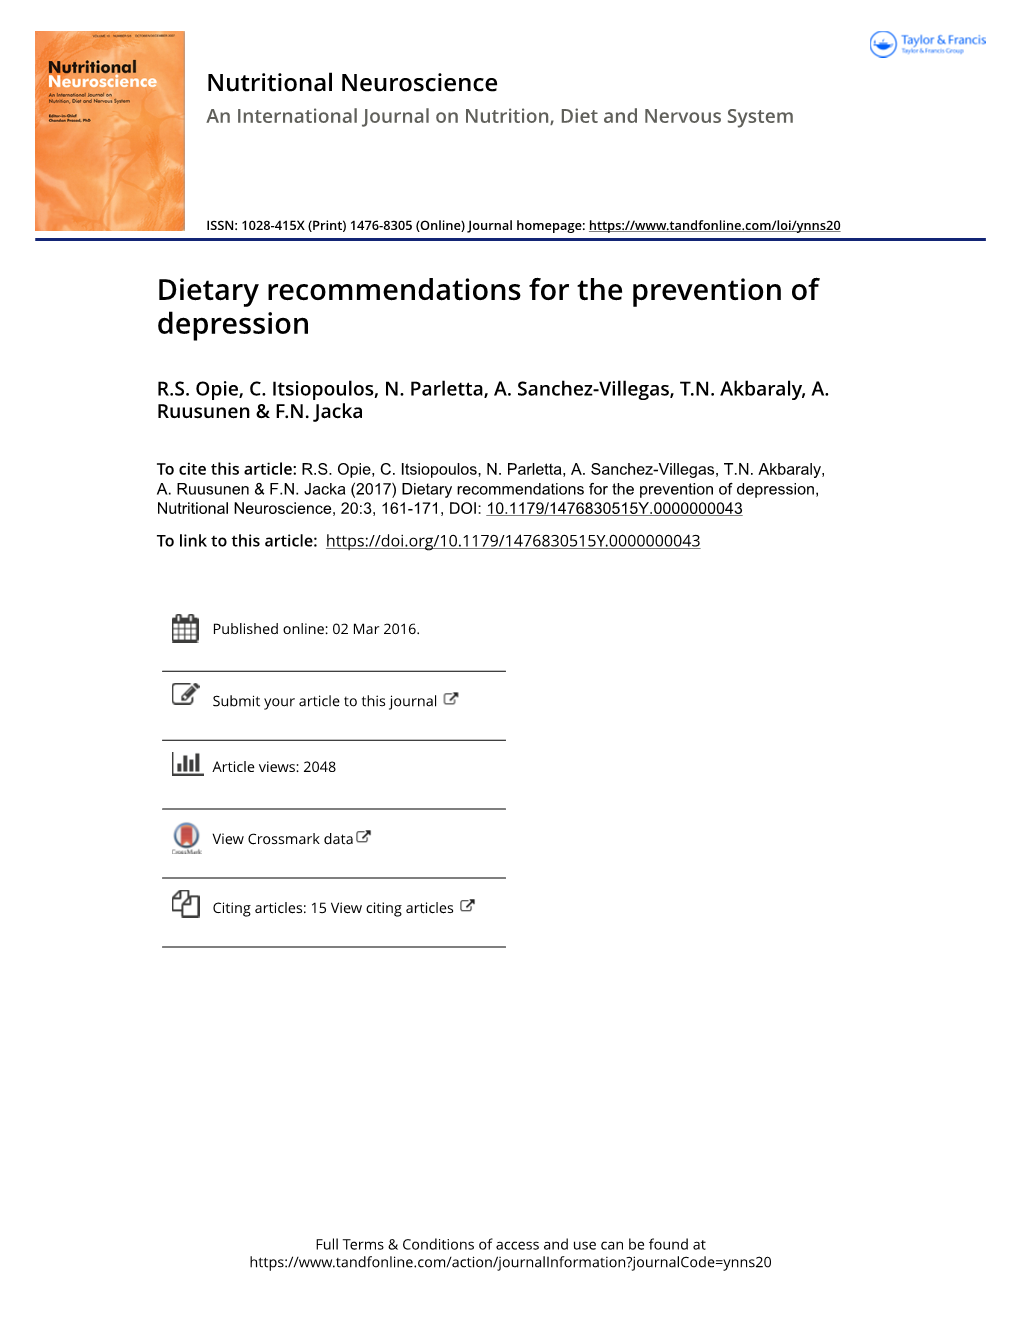 Dietary Recommendations for the Prevention of Depression